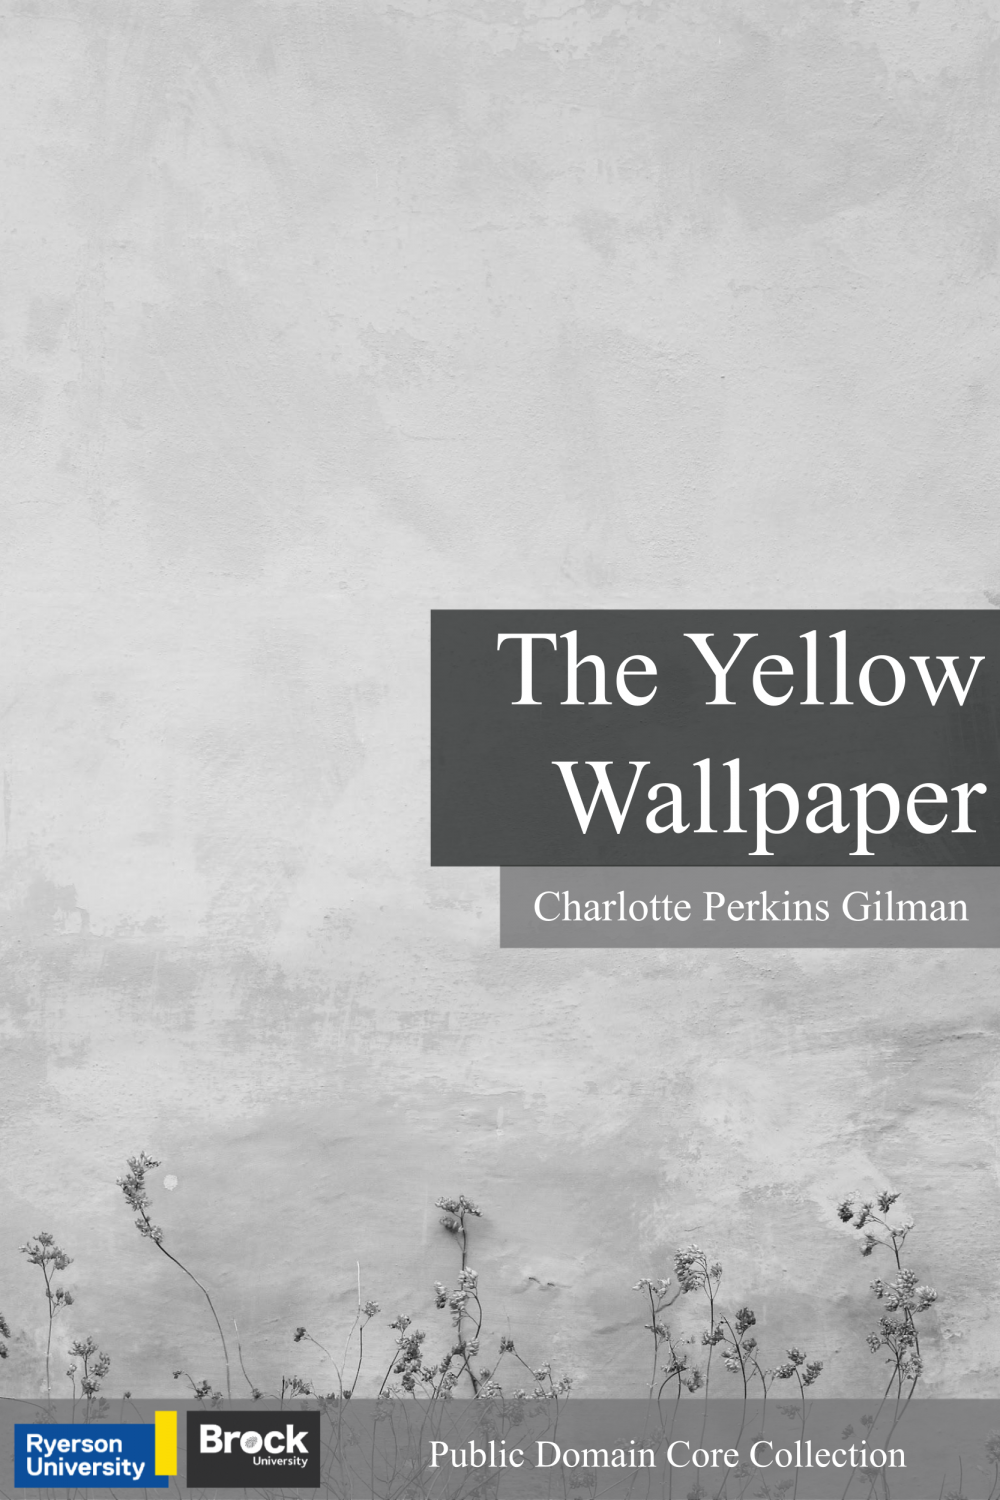 Figurative Language in The Yellow Wallpaper by Charlotte Perkins Gilman   Examples  Analysis  Video  Lesson Transcript  Studycom